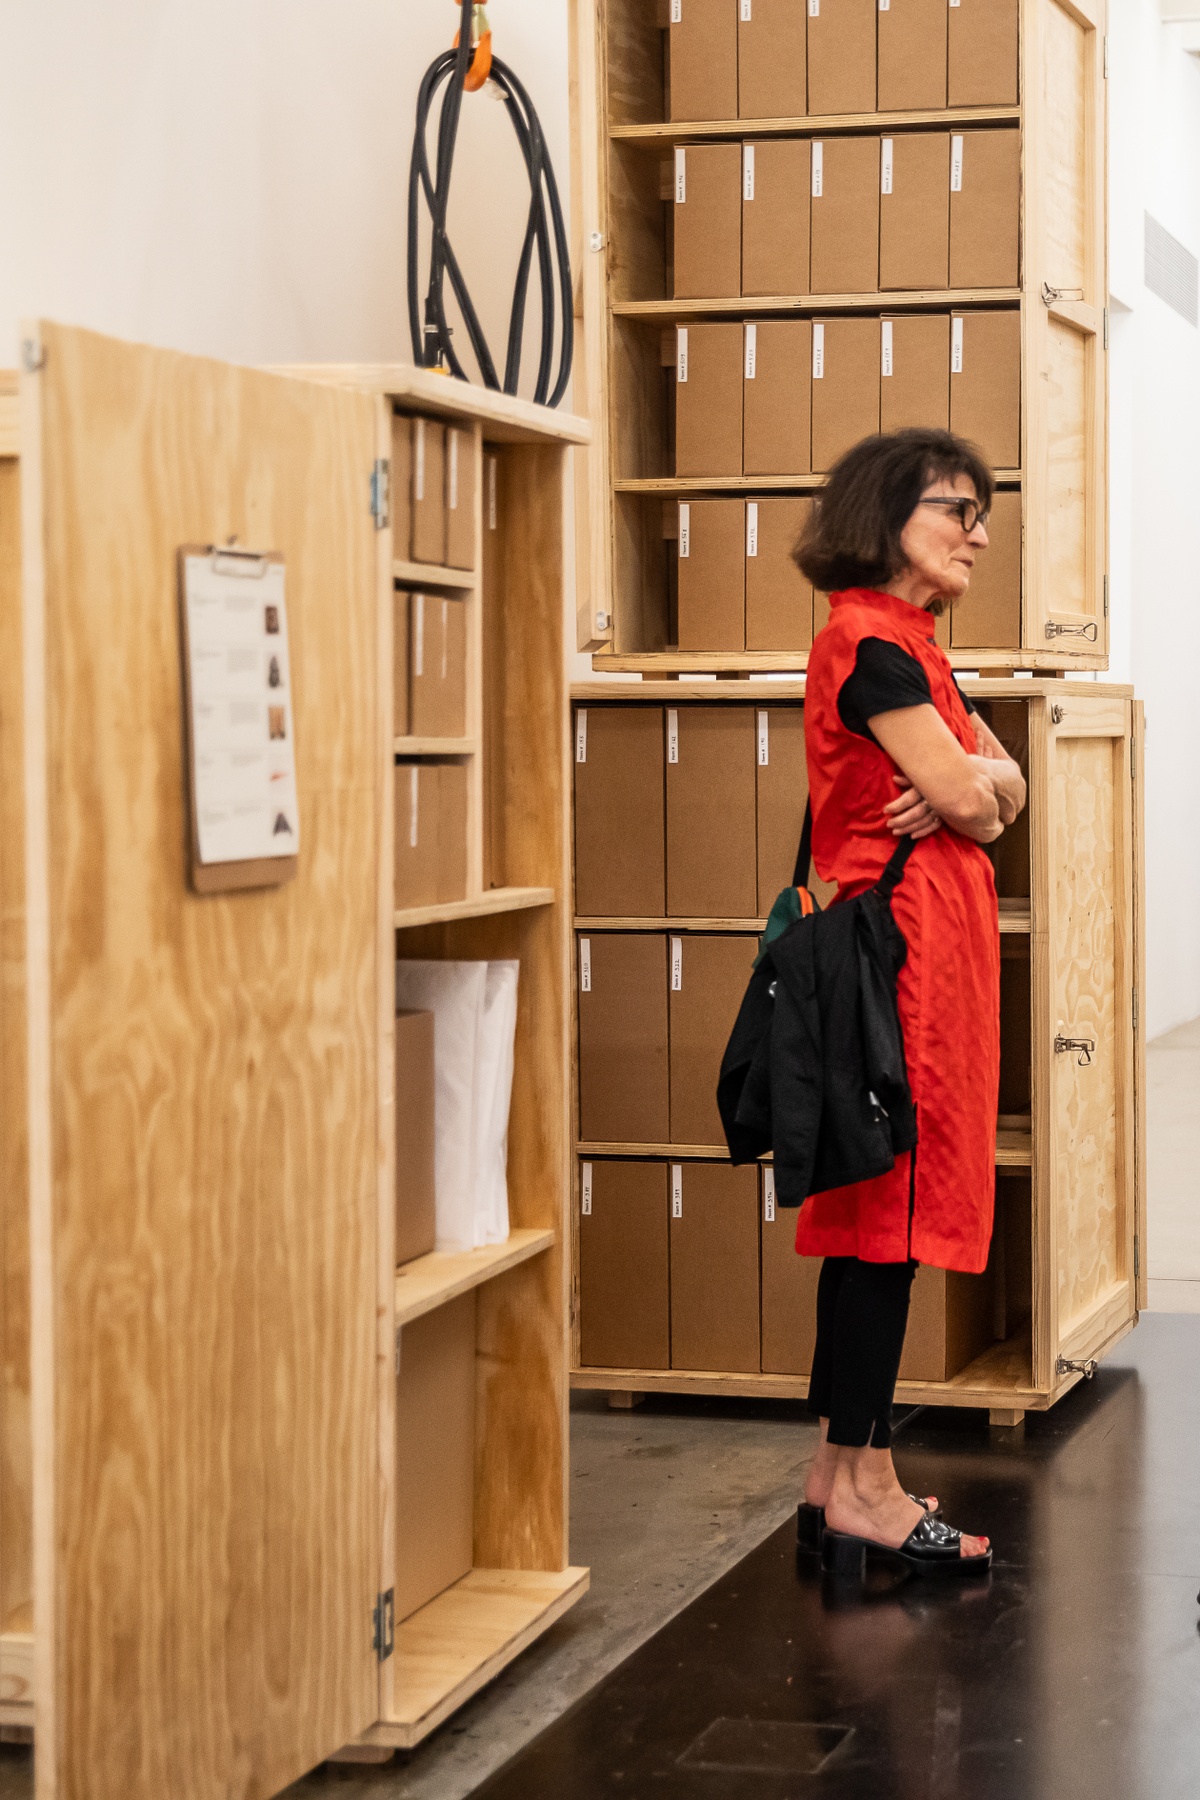 Event photograph from the preview of the 'A Little After This' exhibition in A4 Arts Foundation. At the back, collected objects from Penny Siopis' 'Will' work are stored in envelopes and wooden crates. At the front, Penny Siopis is standing.
